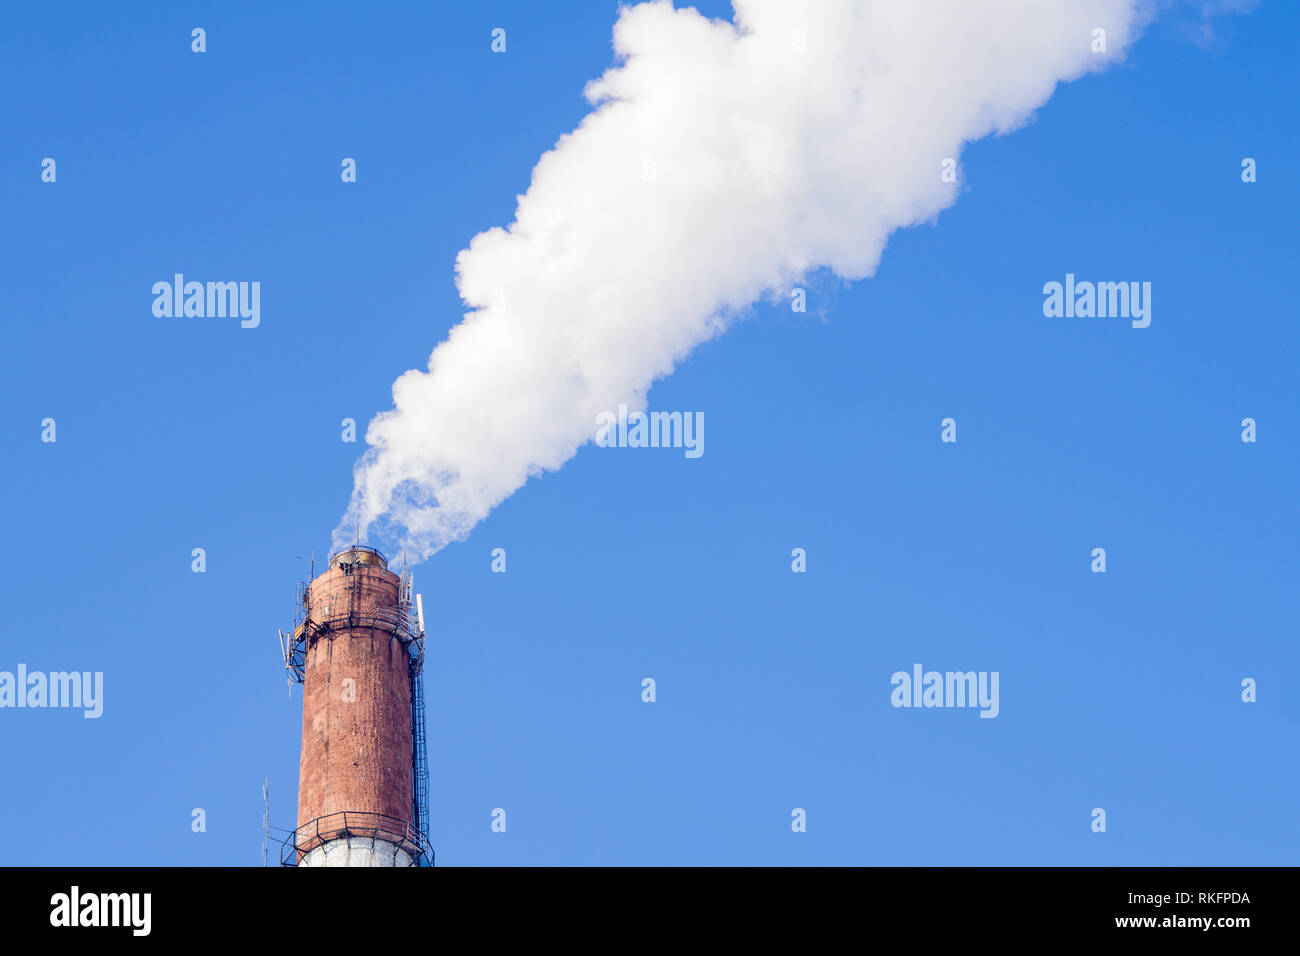 Smoke from industrial chimneys against the blue sky. Pollution. Stock Photo